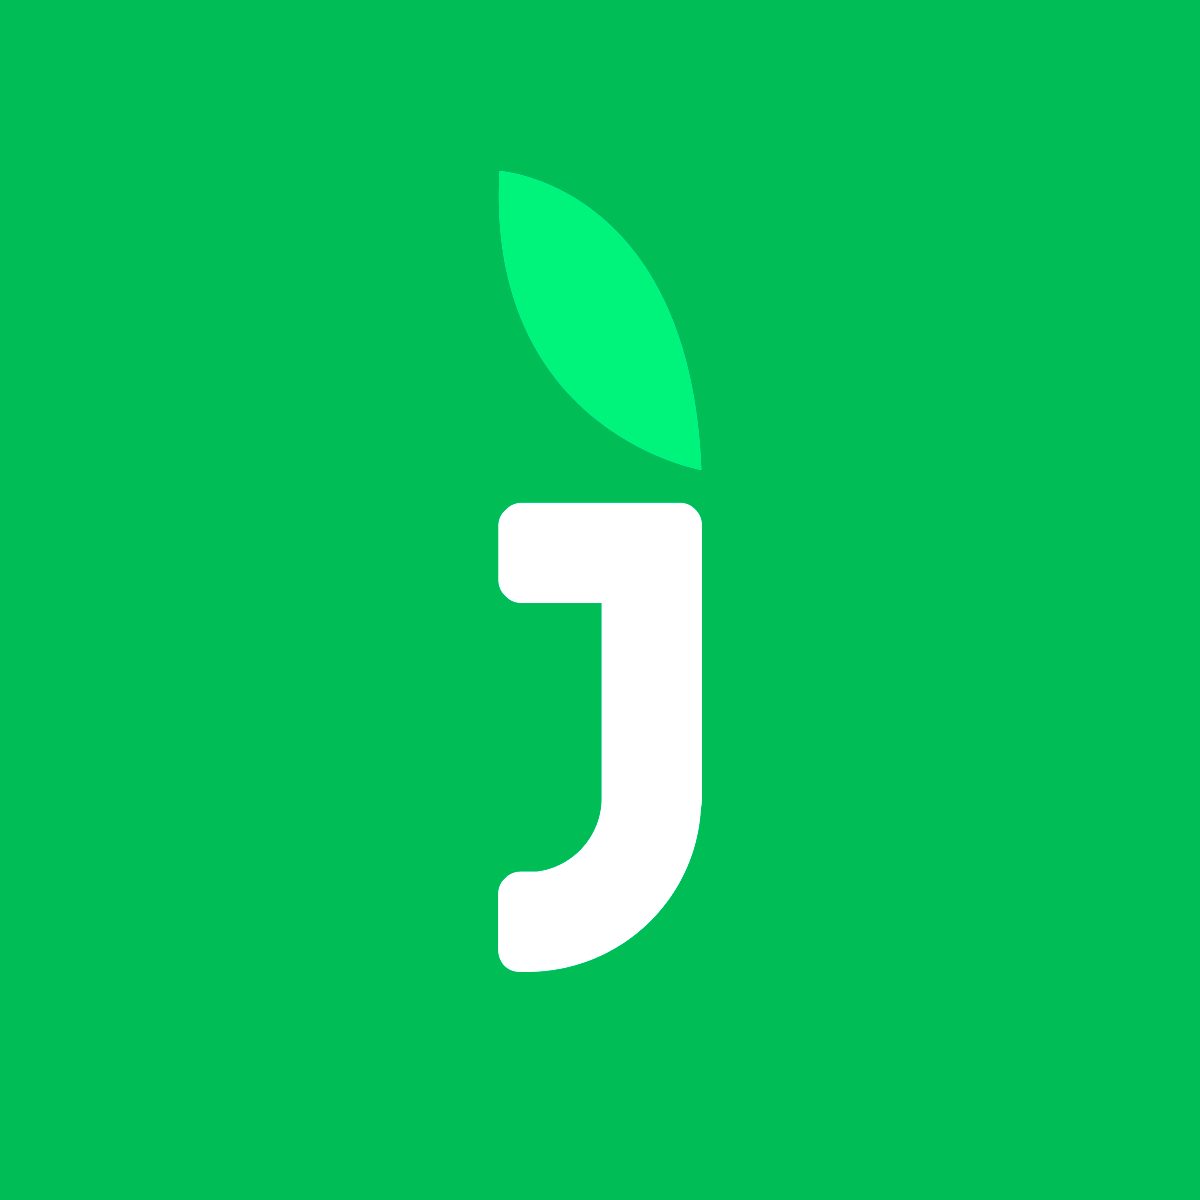 Hire Shopify Experts to integrate JivoChat Live Chat app into a Shopify store